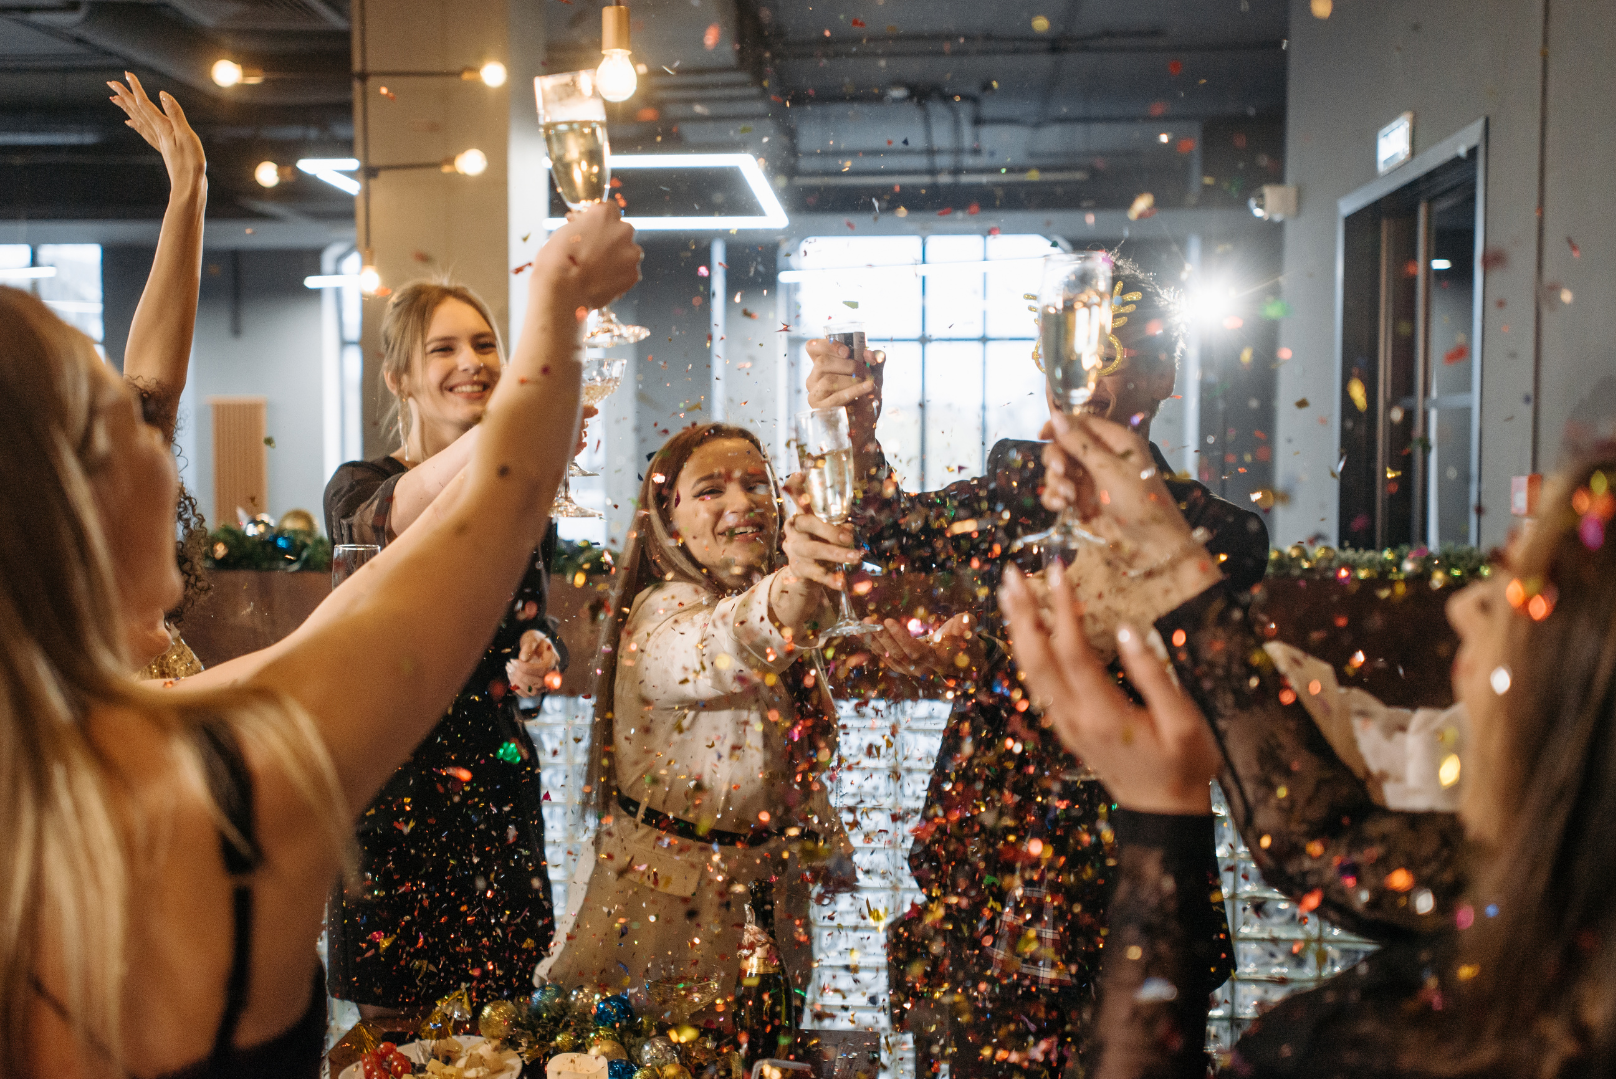 Team members cheers champagne happy at company holiday gathering